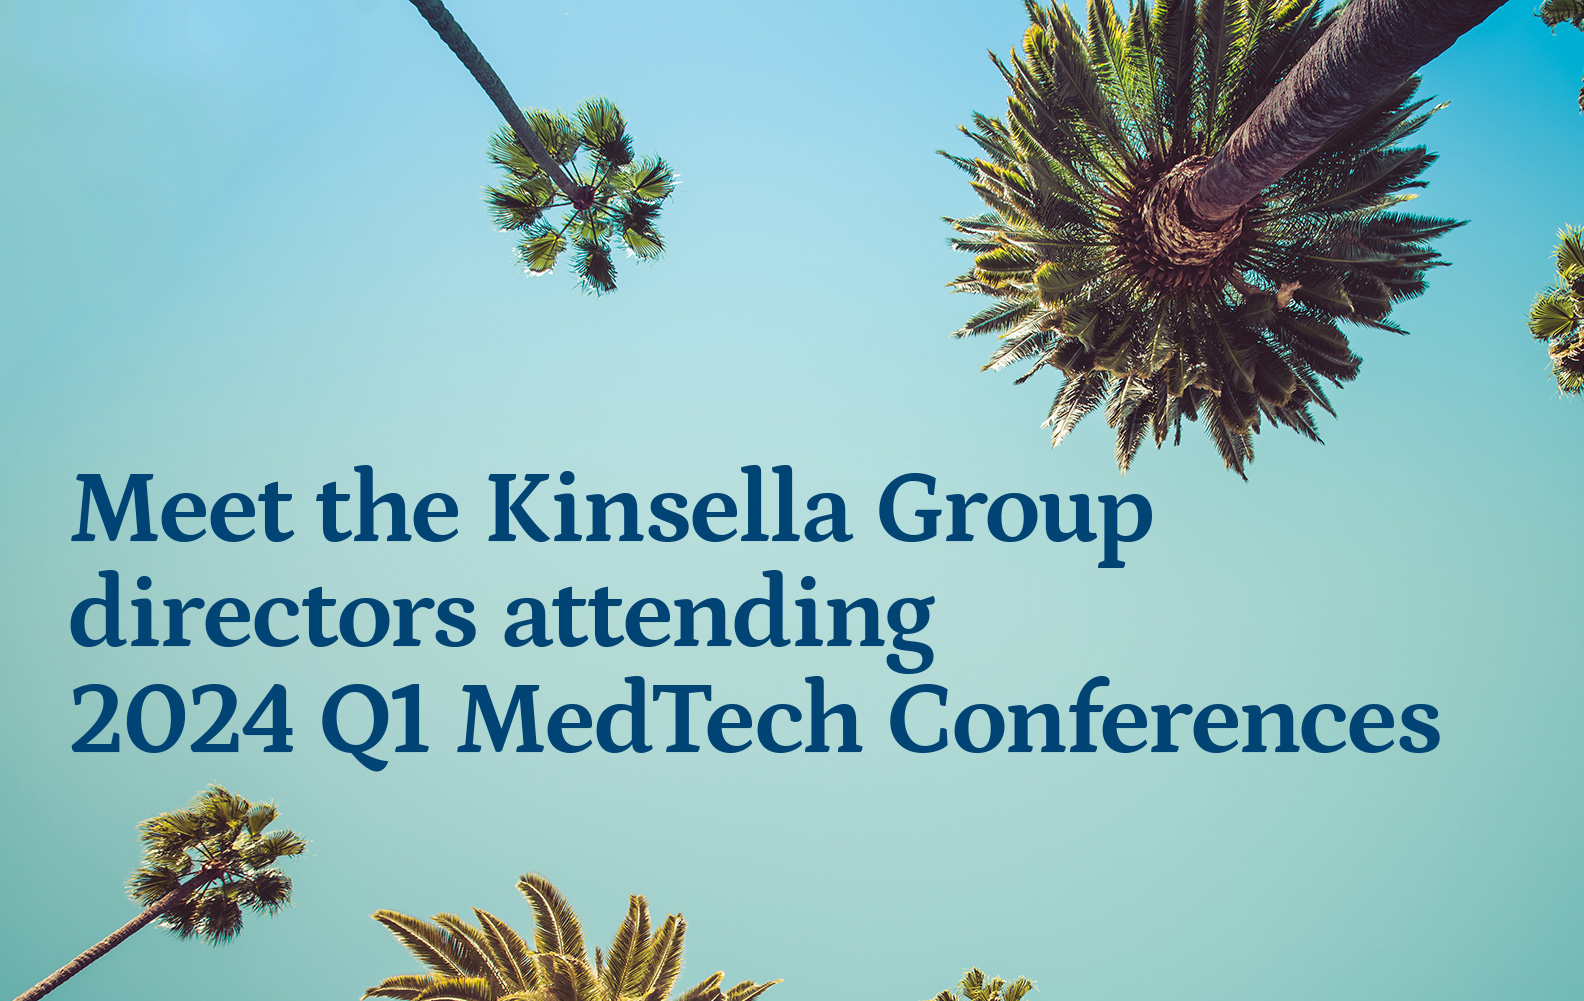 Meet the Kinsella Group directors attending 2024 Q1 MedTech Conferences